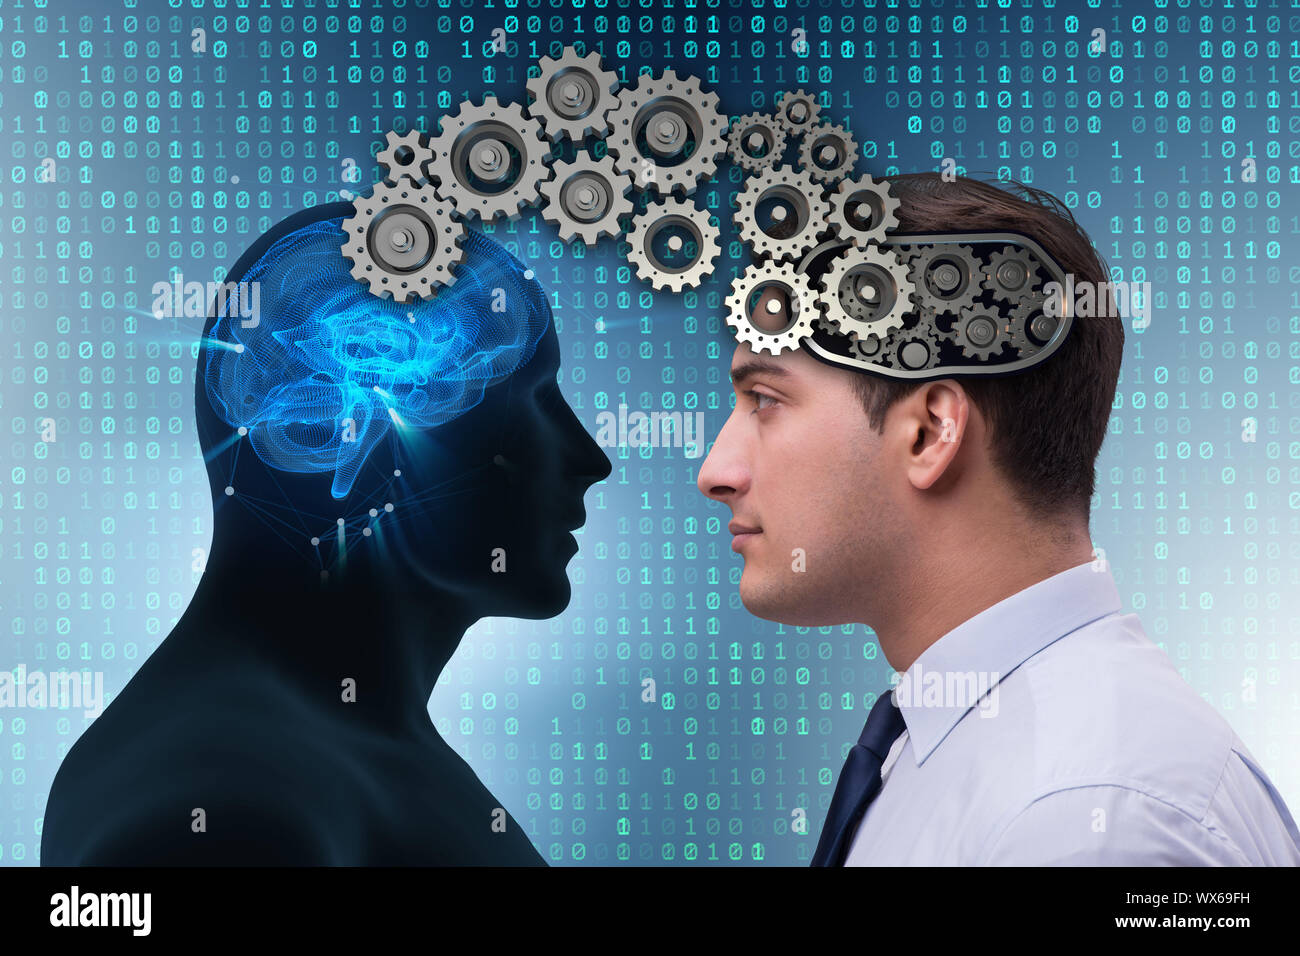 Cognitive computing concept as future technology with businessma Stock Photo